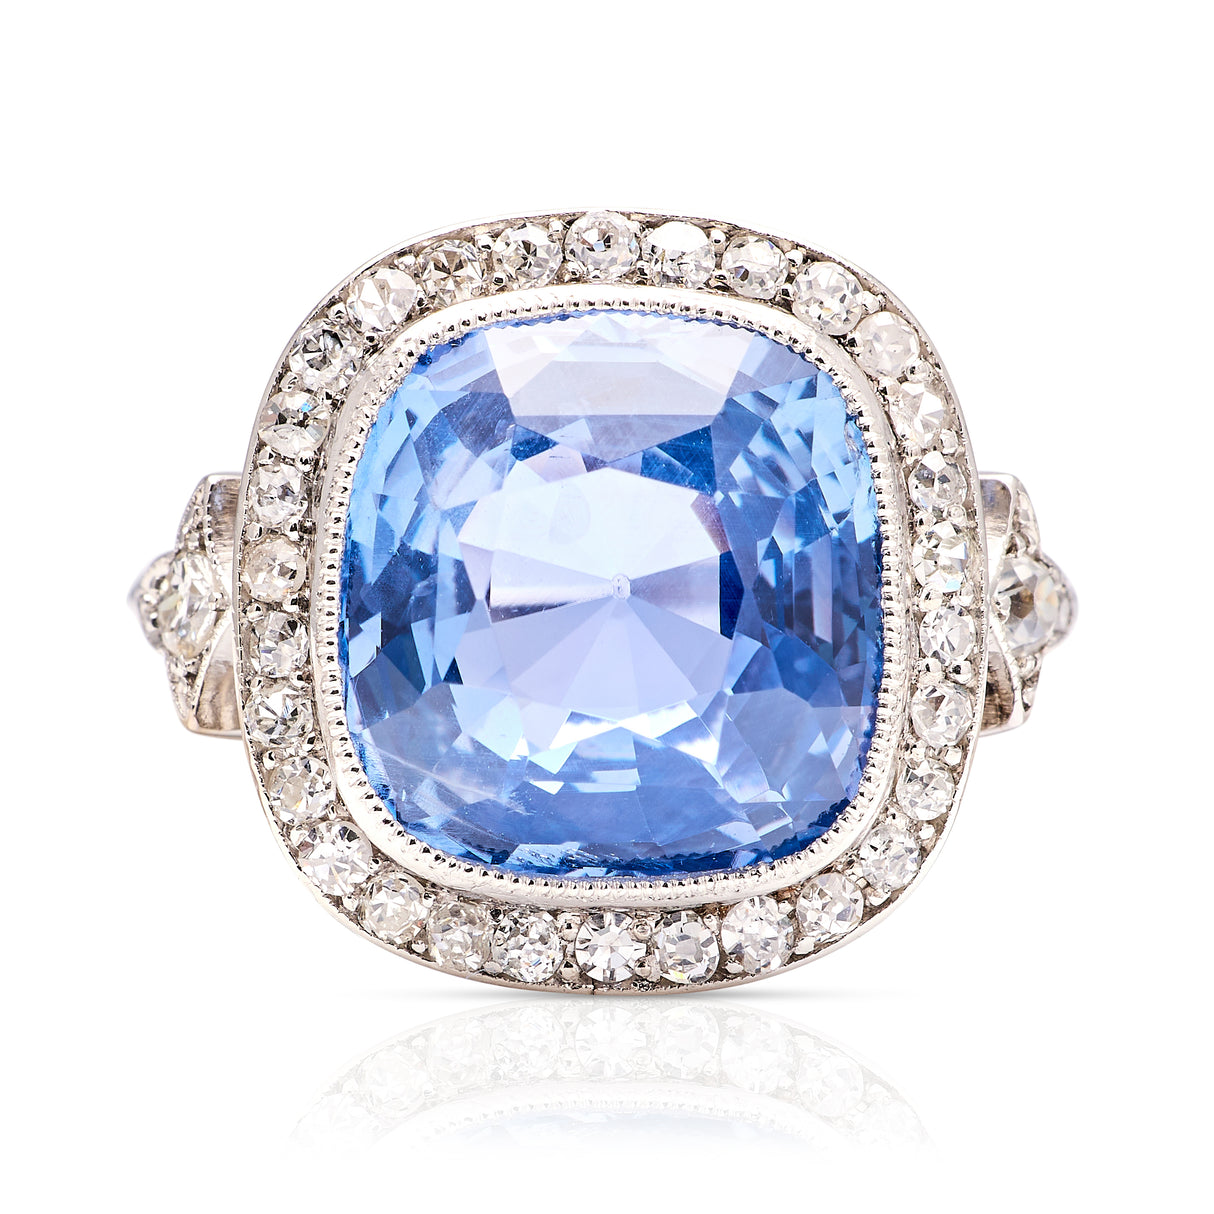 Antique, Belle Époque 8ct cushion-cut sapphire and diamond cluster ring, 18ct white gold